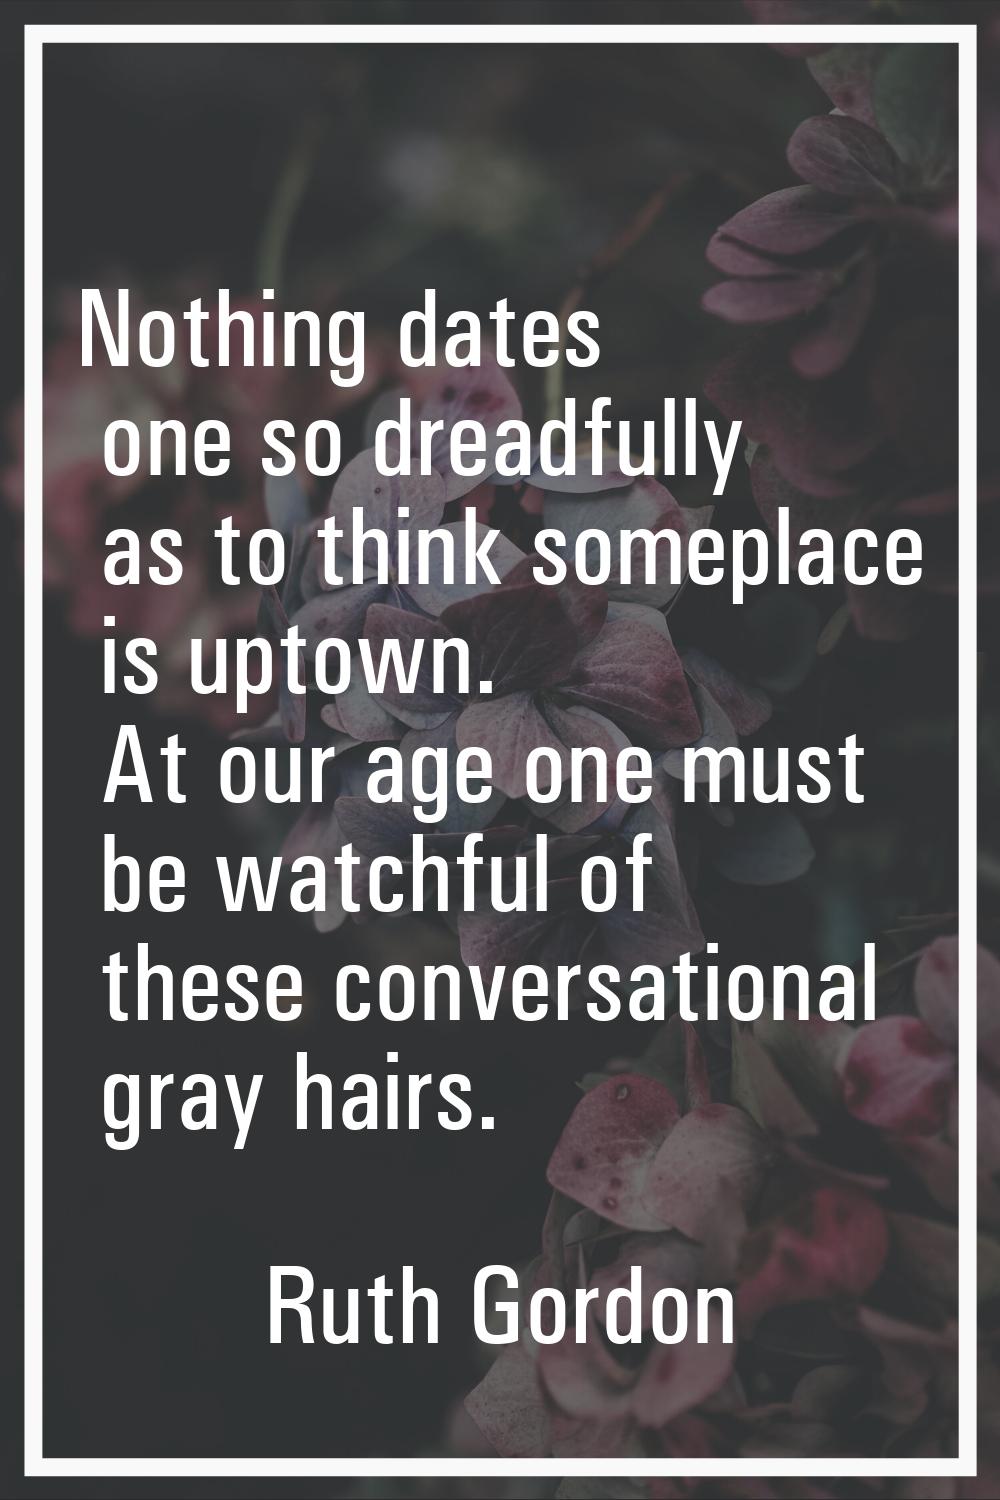 Nothing dates one so dreadfully as to think someplace is uptown. At our age one must be watchful of